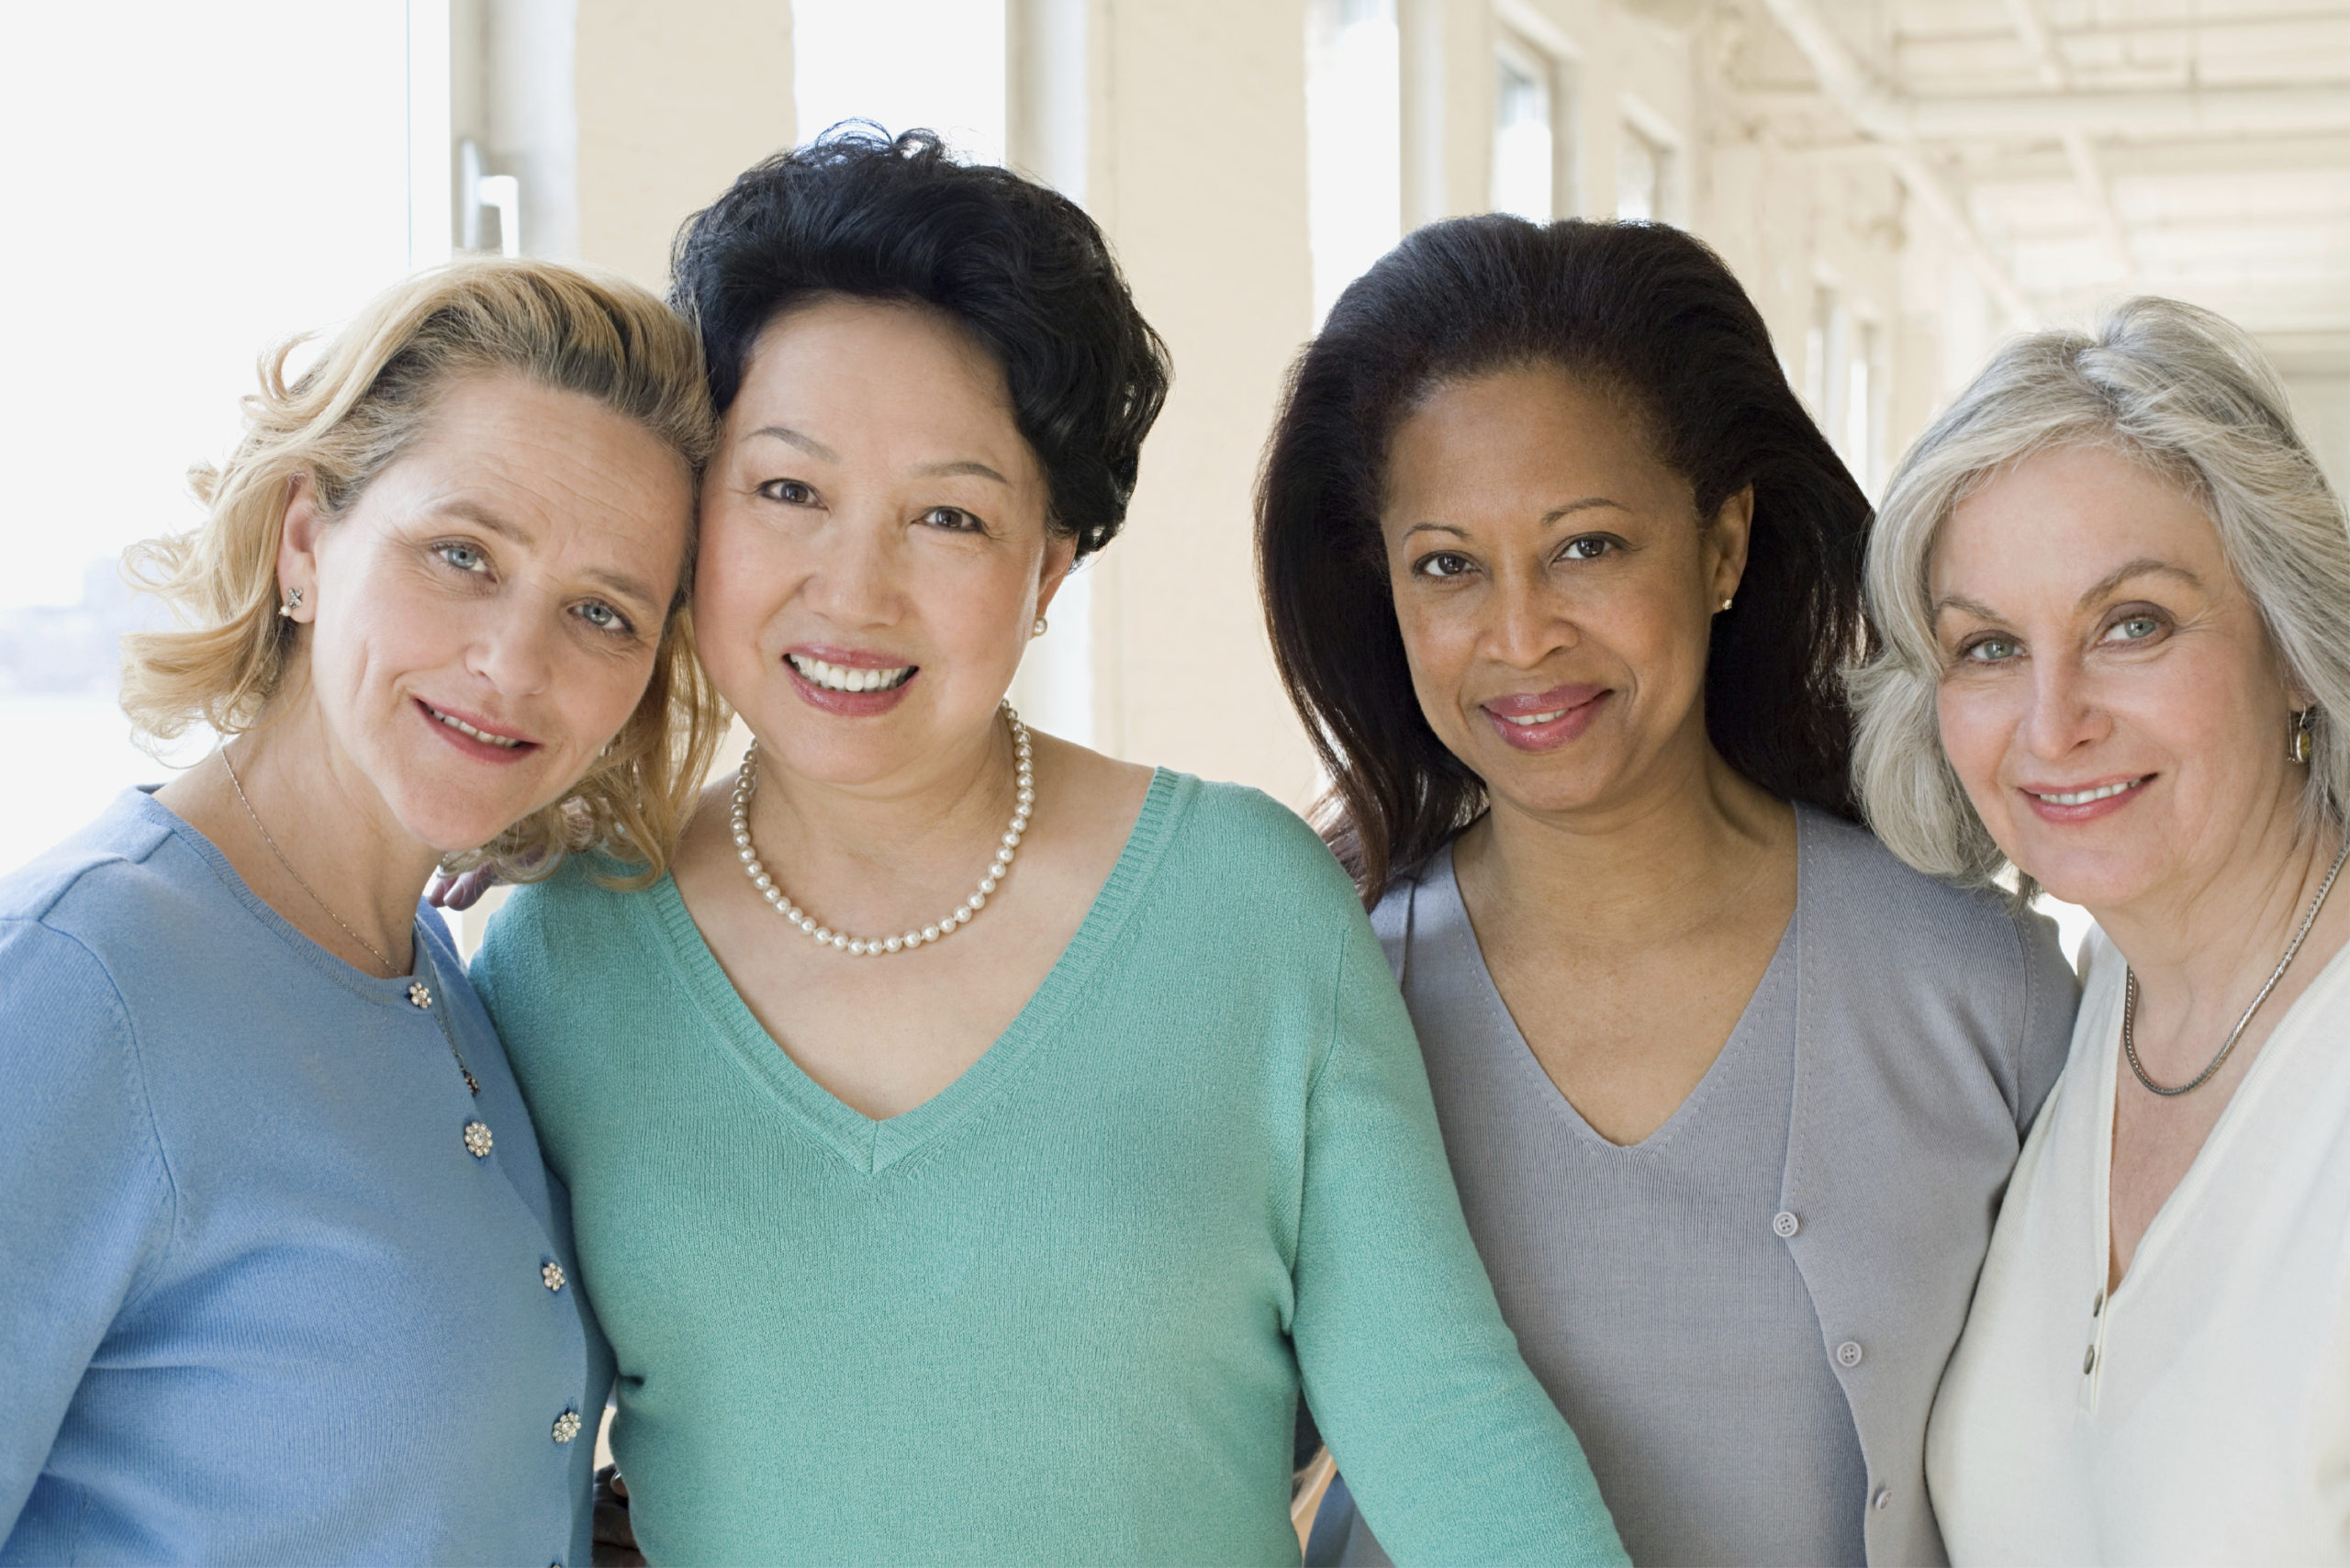 four women standing together smiling. 